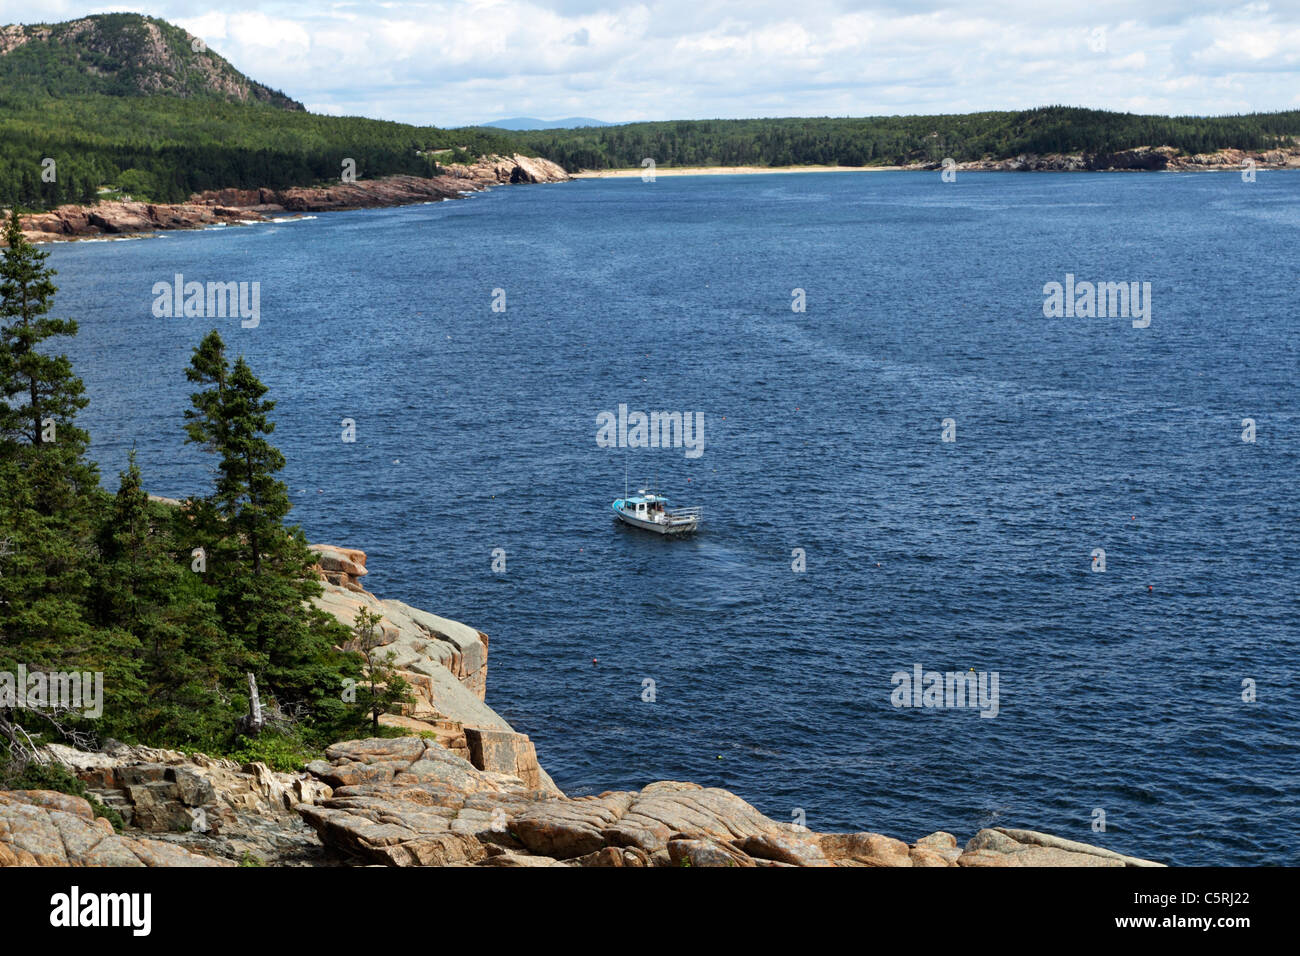 A lobster boat tending to its pots off the coast of Acadia National Park, Mount Desert Island, Maine, USA. Stock Photo